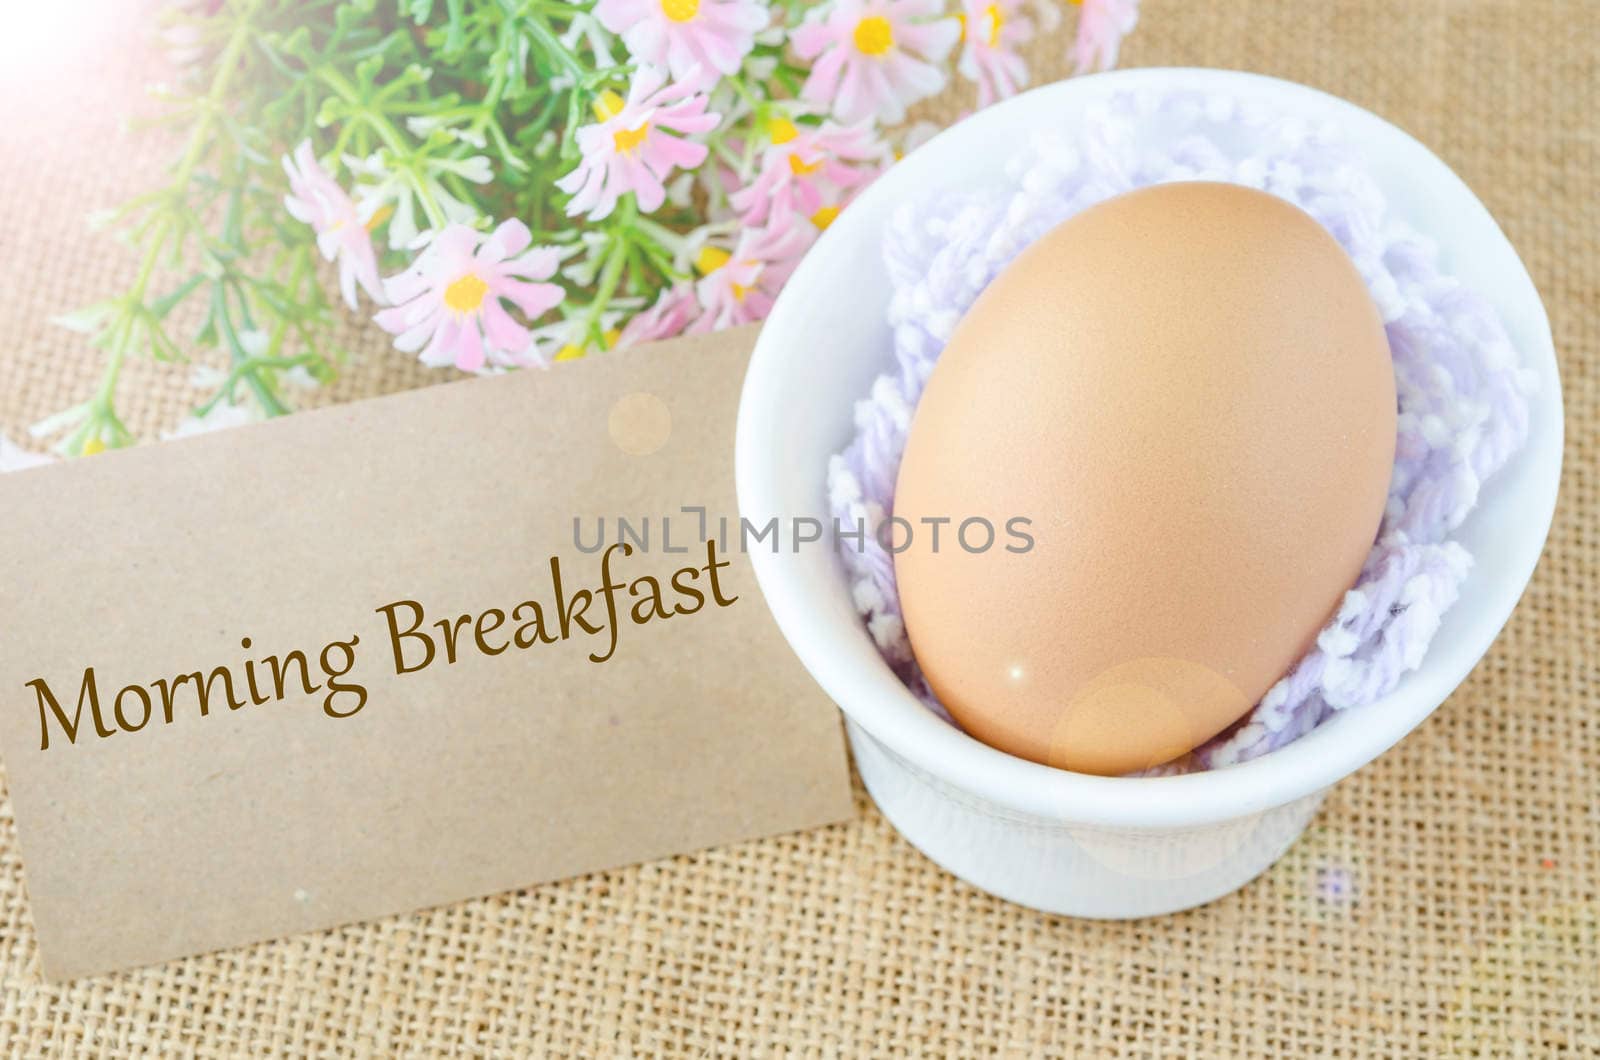 Morning breakfast and egg in white cup with flower on sack background.